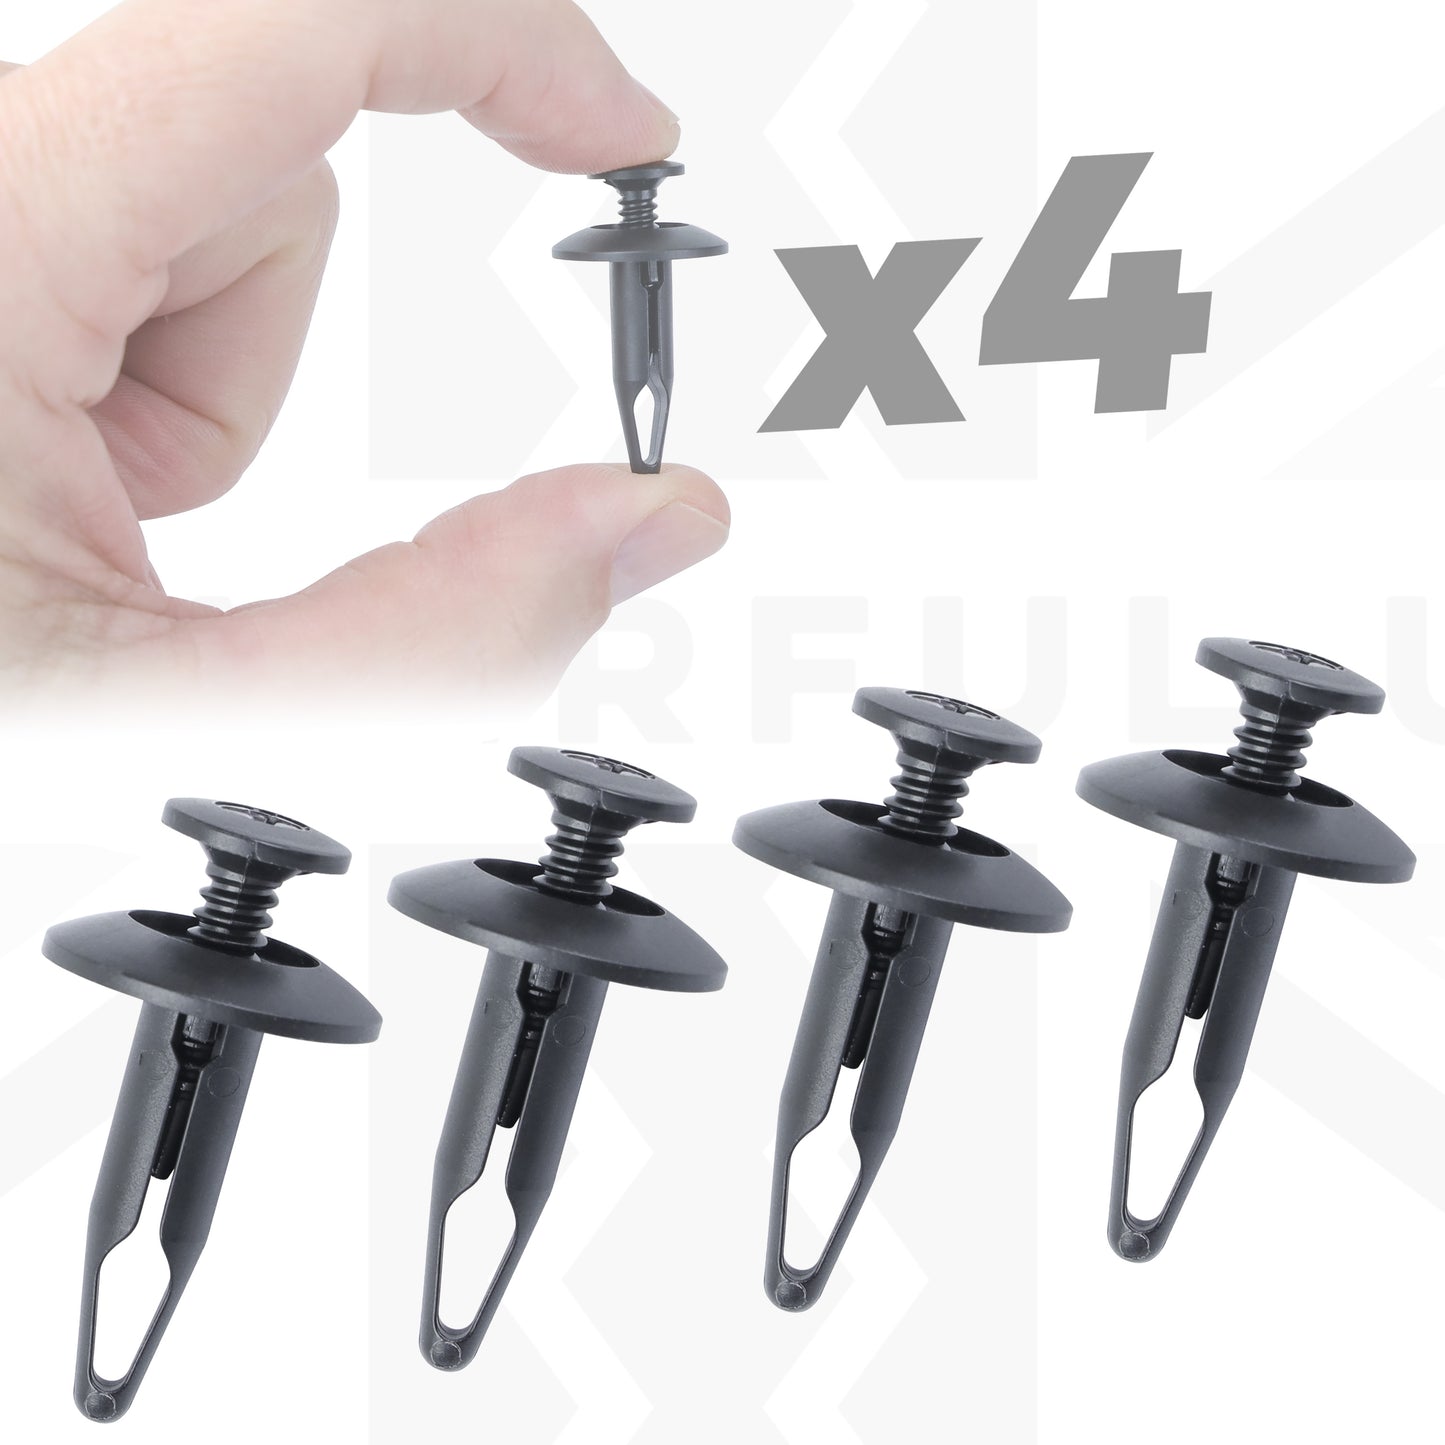 4x Engine Cowl Clips (6.3x22mm Plastic Push Pin type) for Range Rover Evoque - Genuine